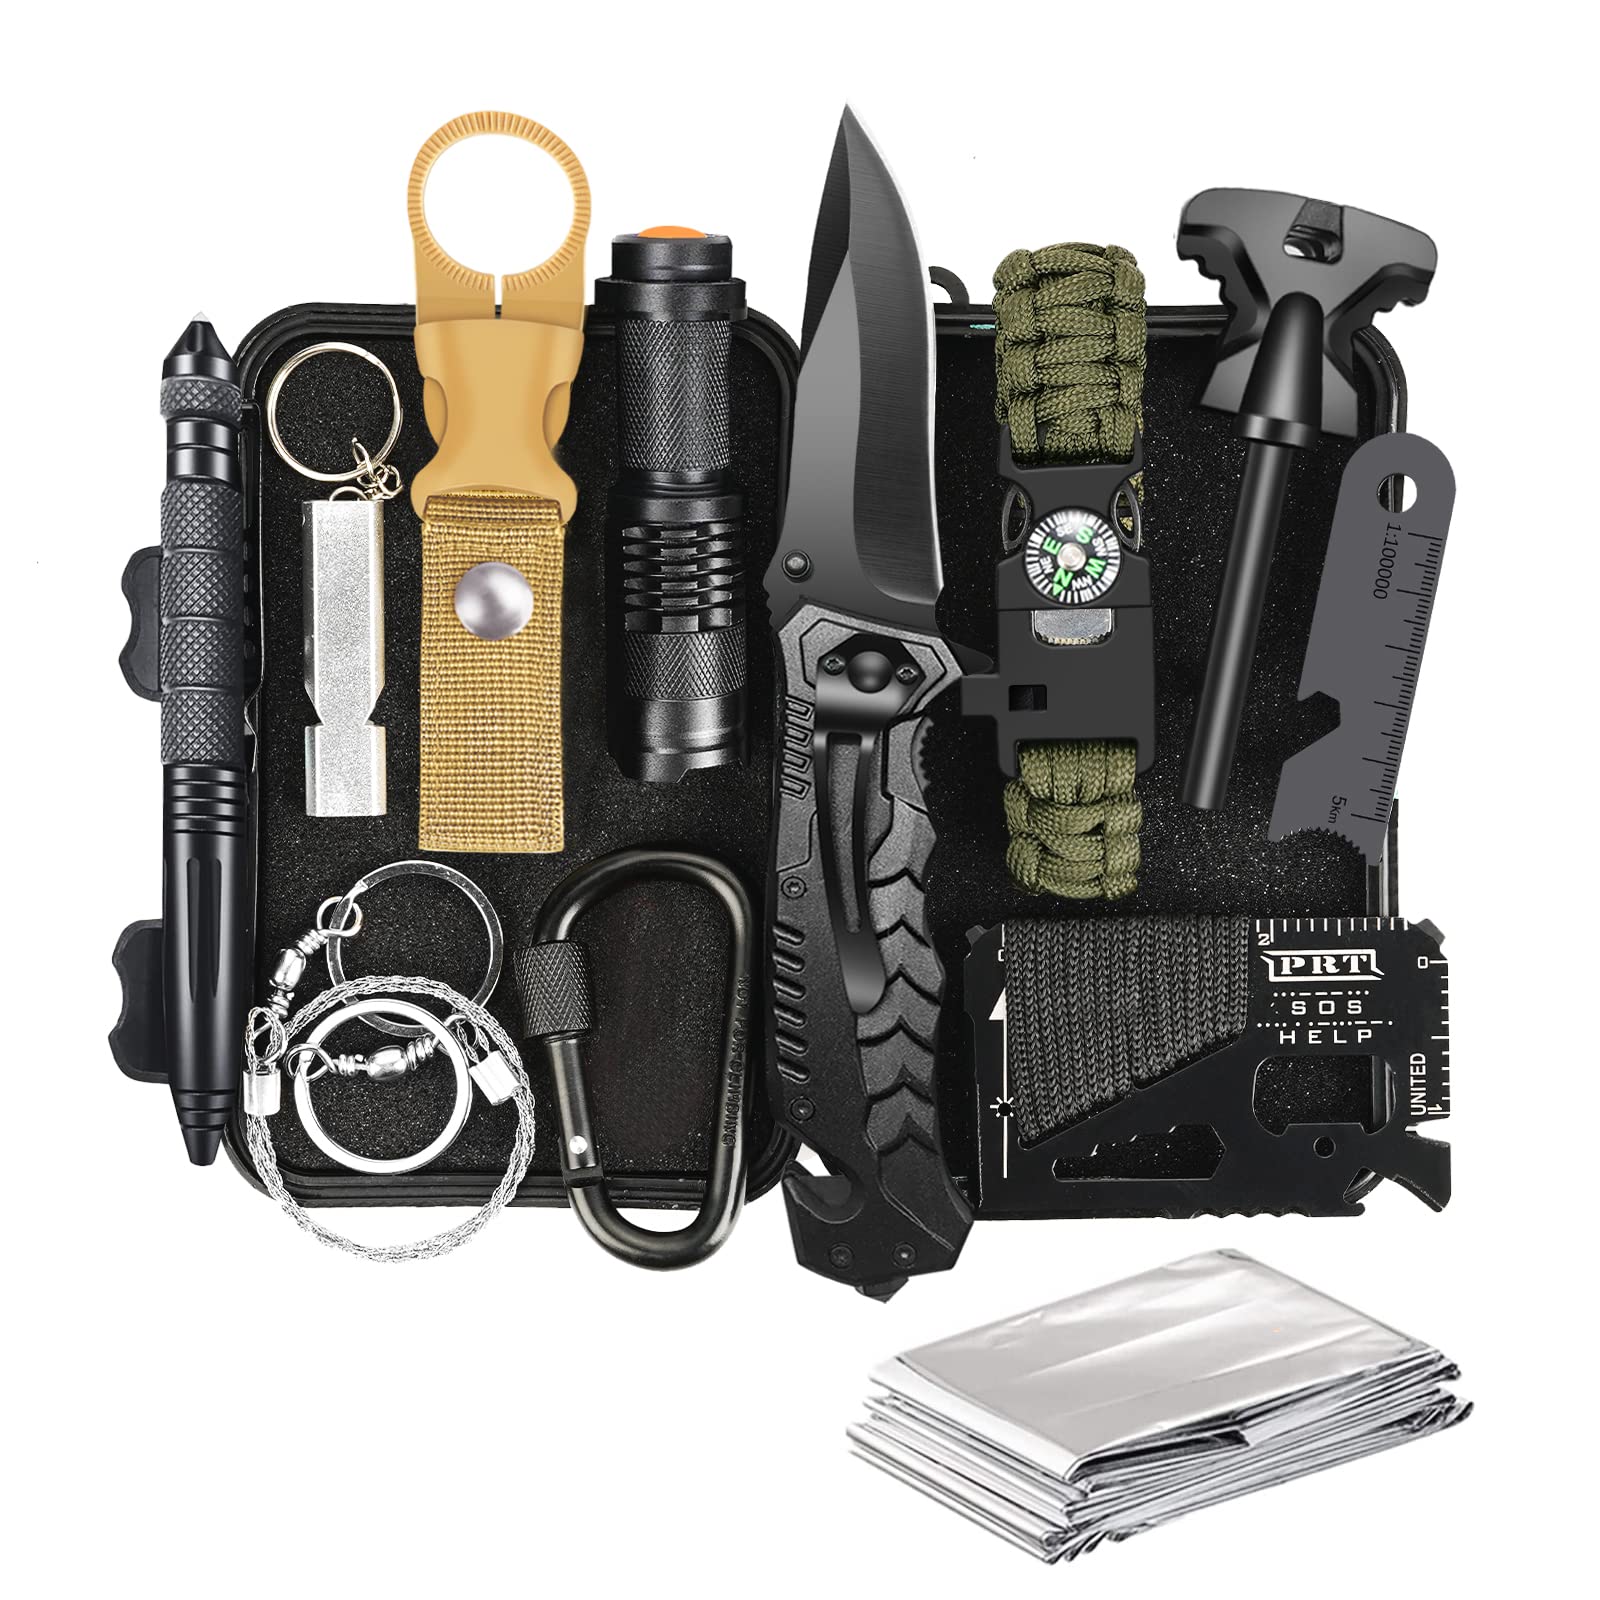 Gifts for Men Dad Husband Fathers Day, Survival Gear and Equipment